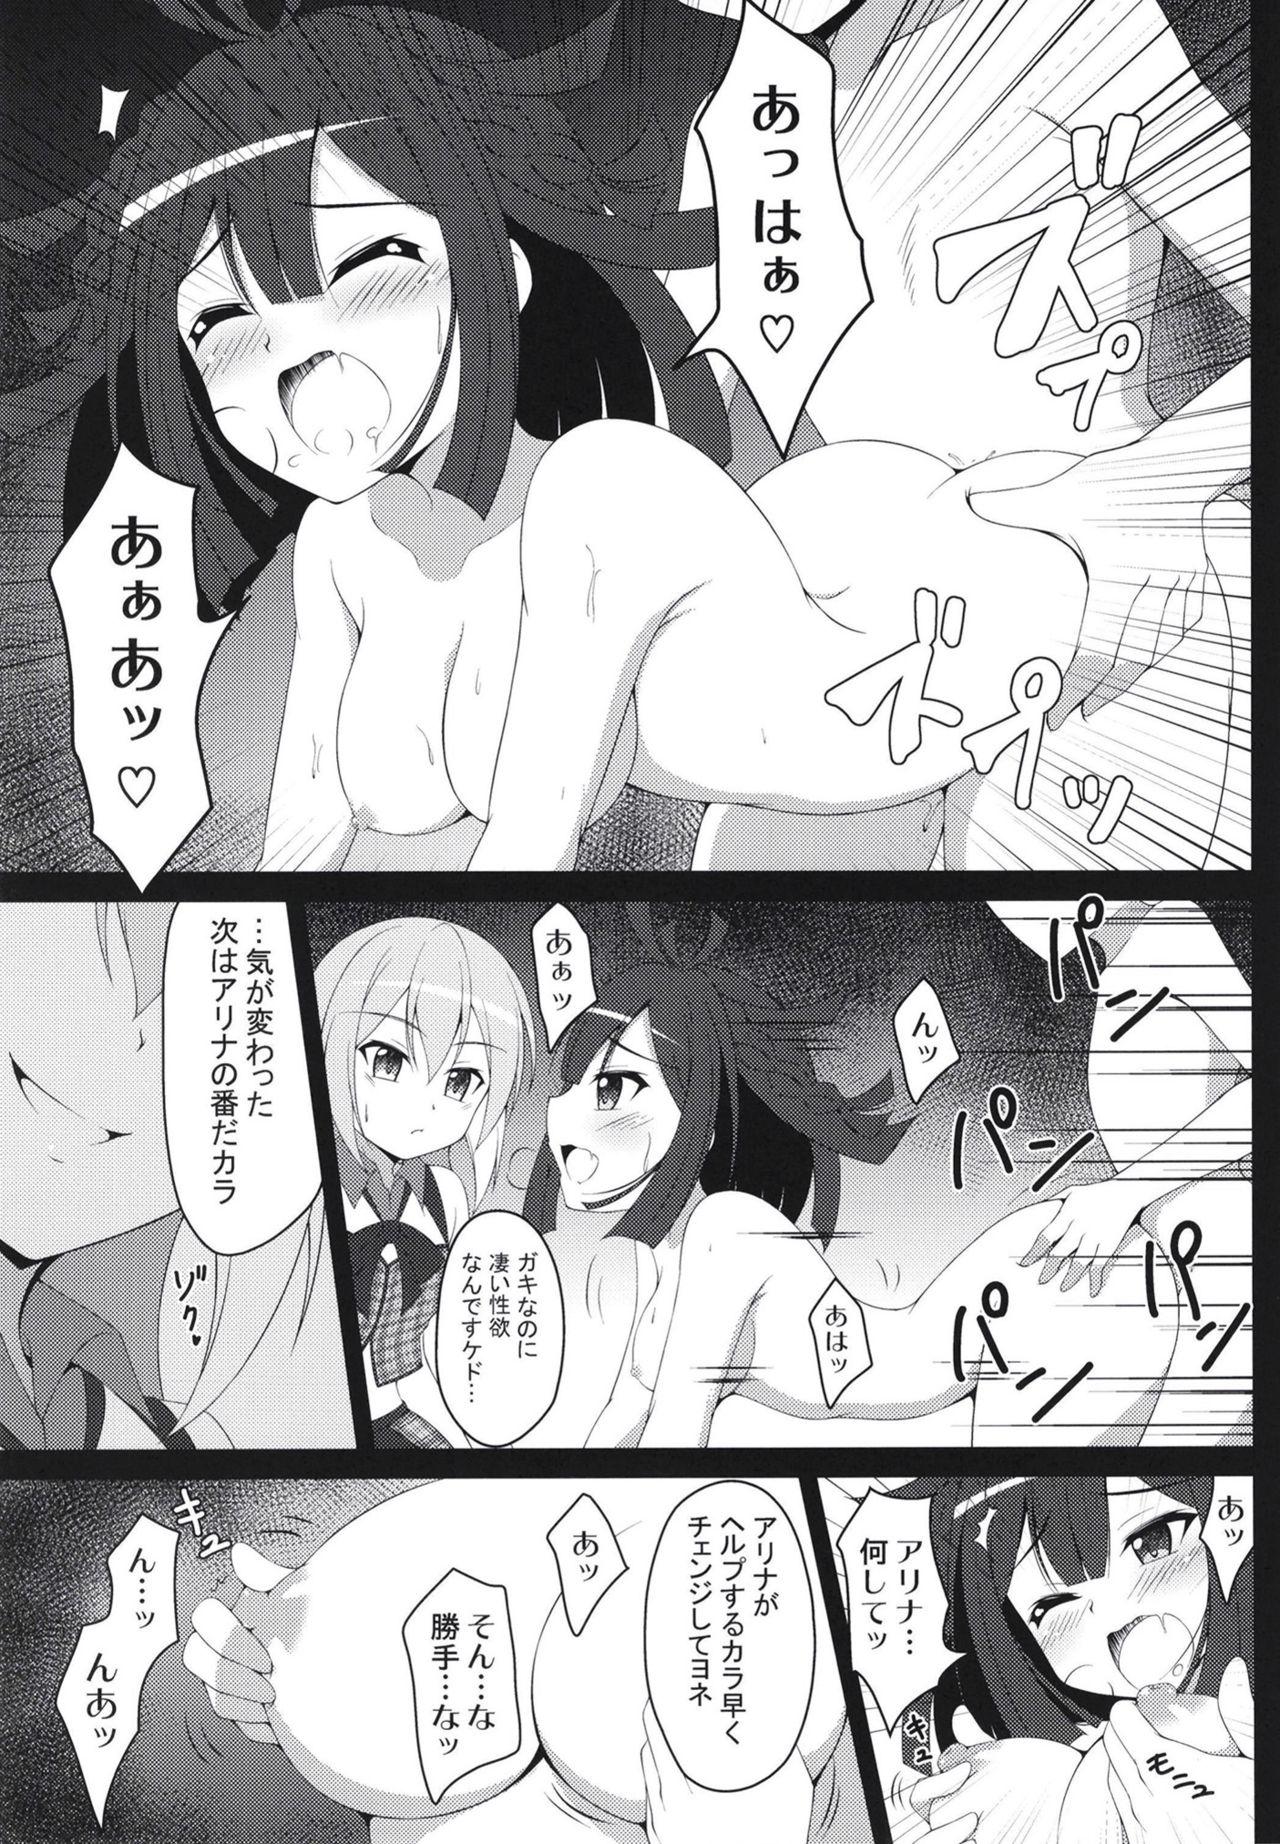 Funny After-party - Puella magi madoka magica side story magia record Teenfuns - Page 12